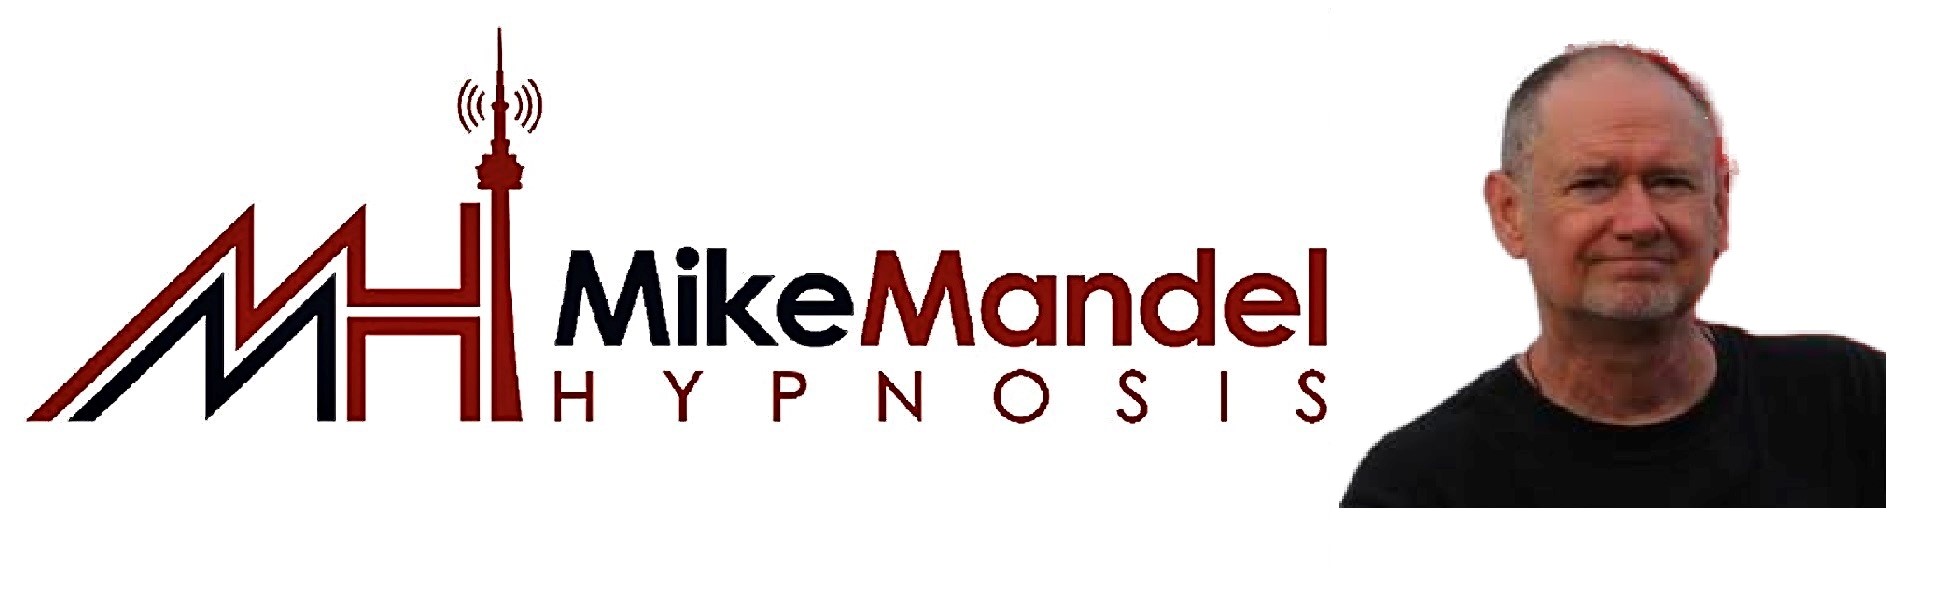 Hypnosis Academy – Lessons 1-27 – Mike Mandel